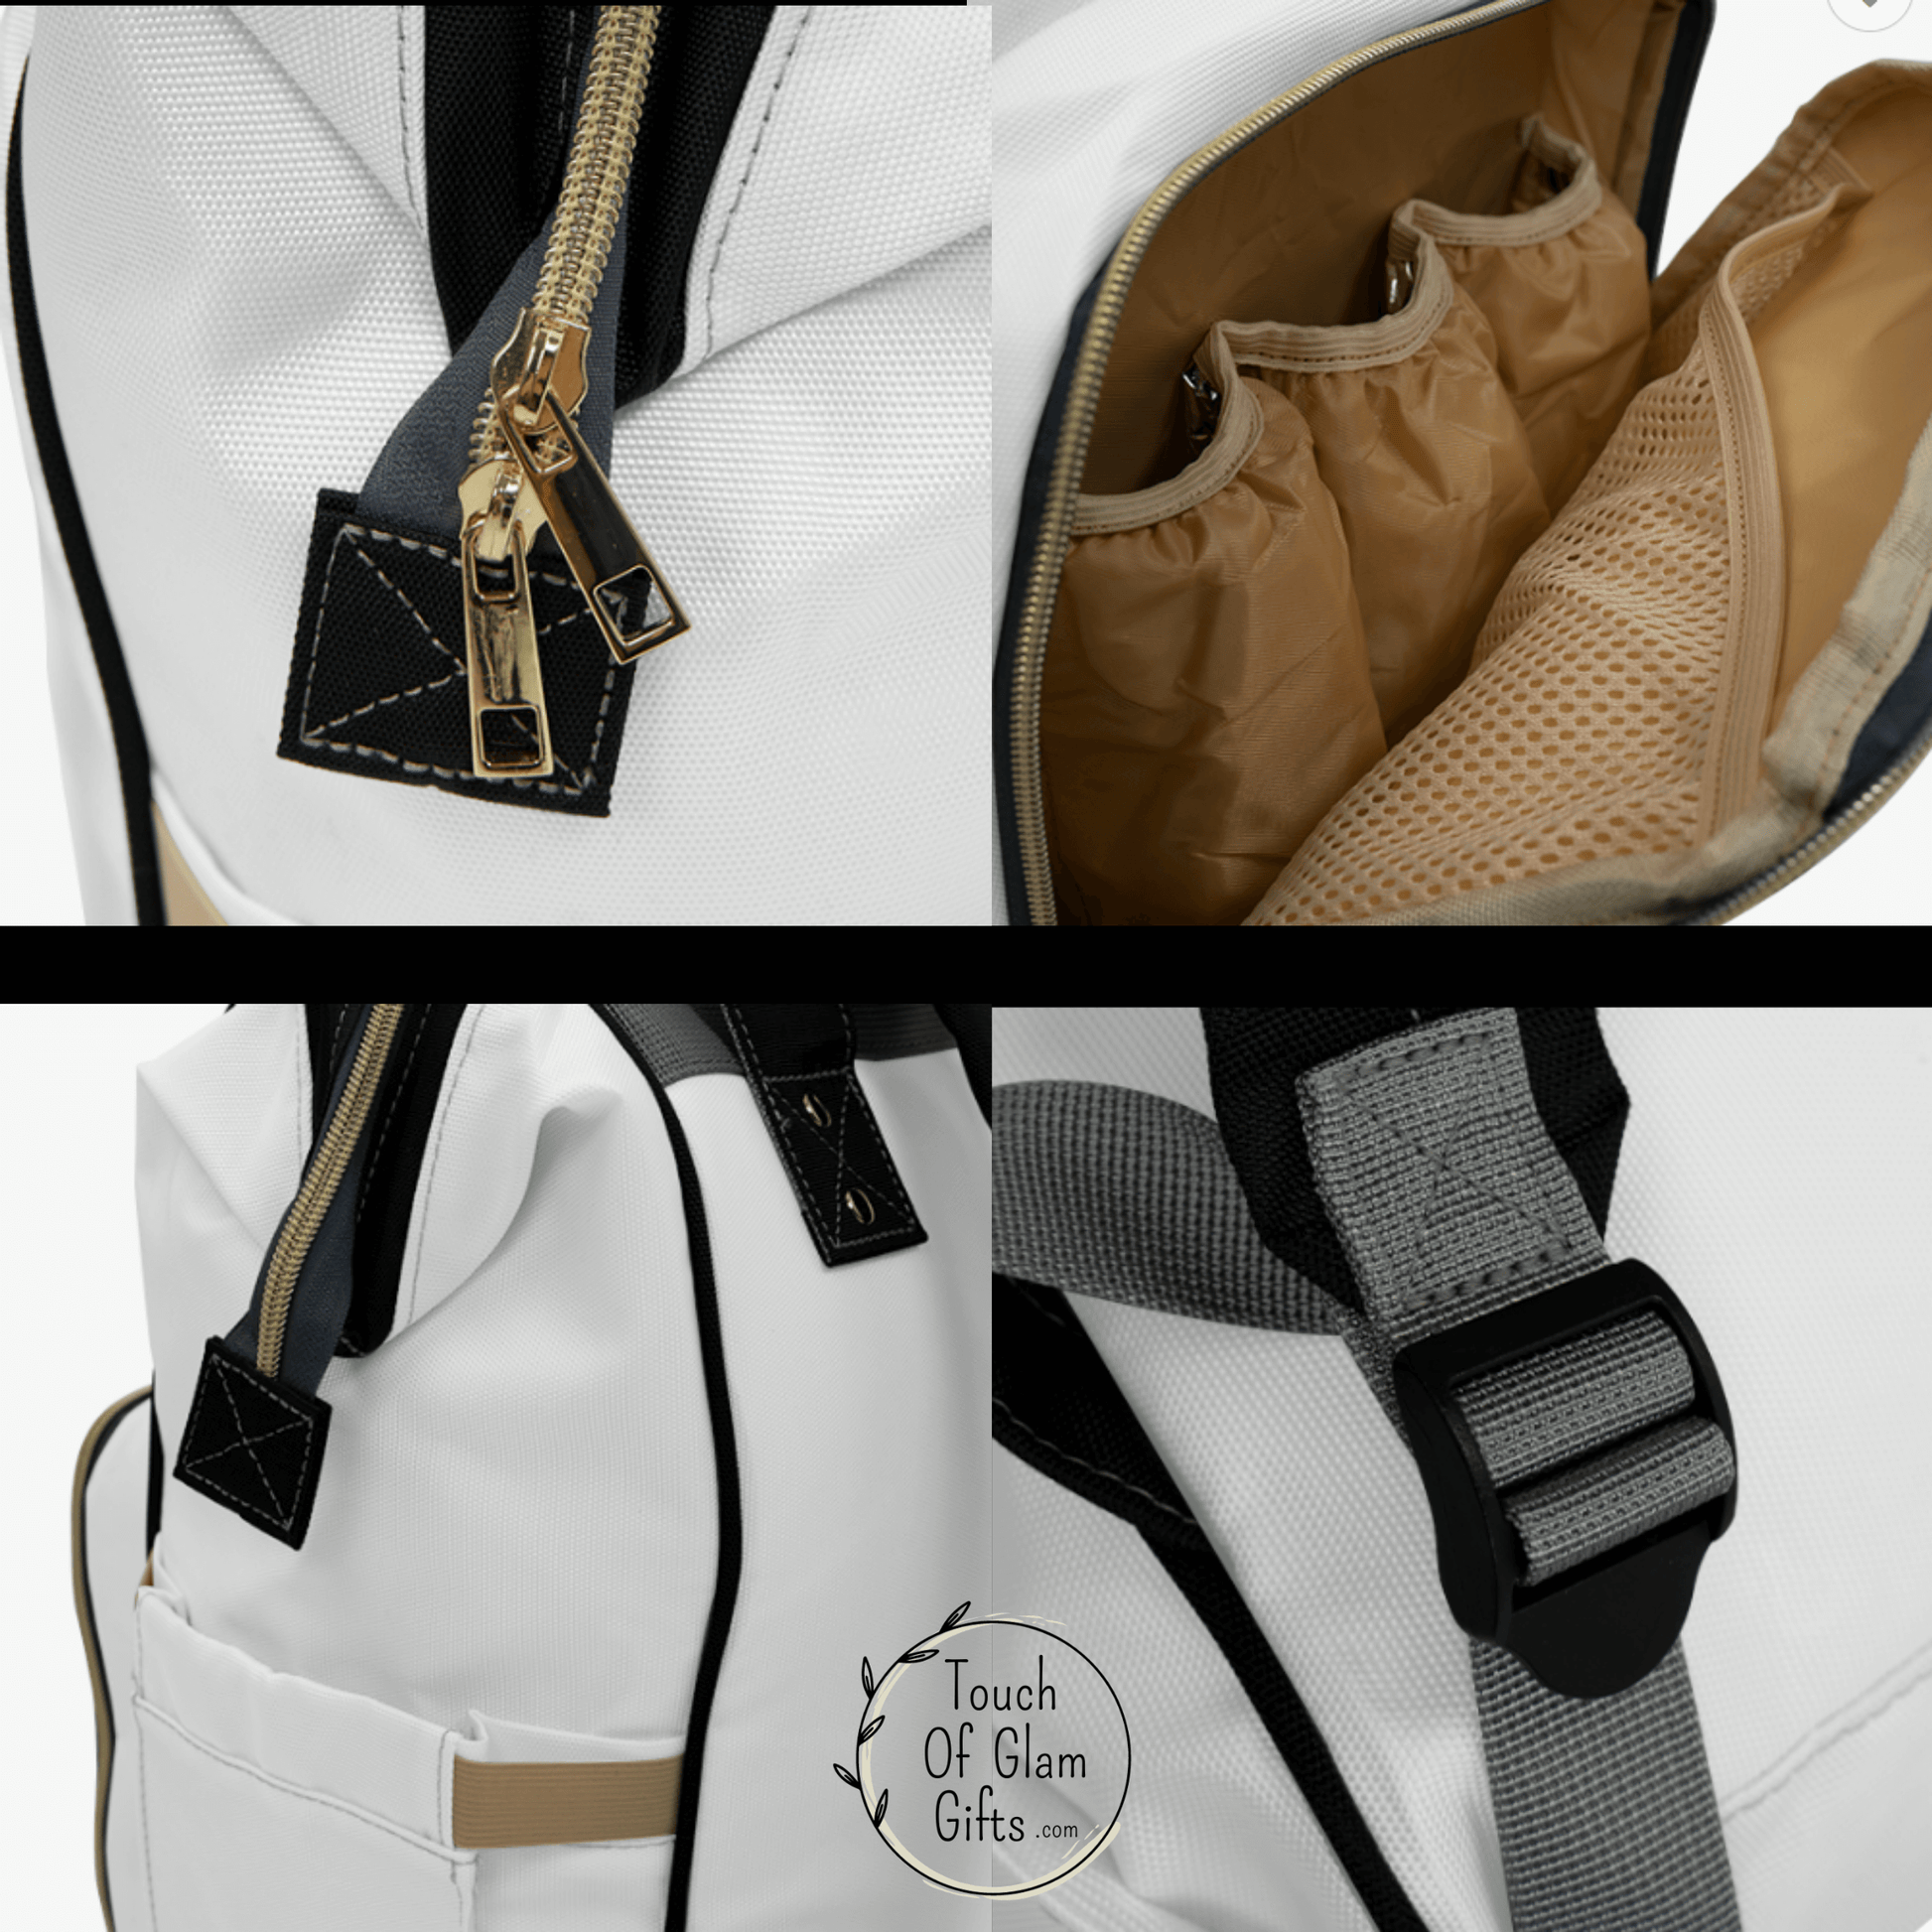 Up close details for our diaper bags shows a khaki color inside that is washable, a gold zipper and black and grey adjustable straps.